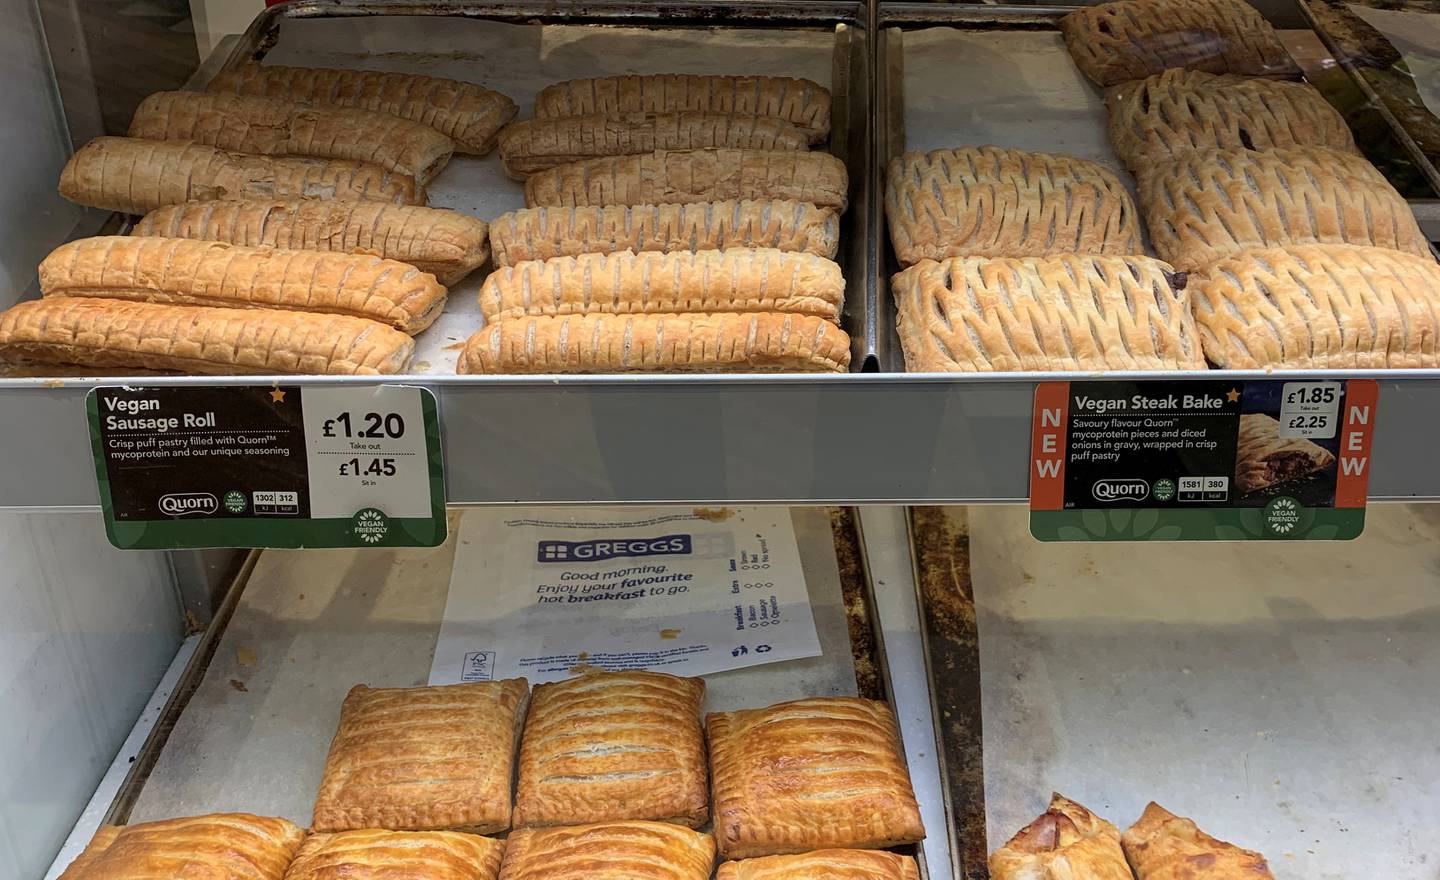 Vegan sausage rolls and steak bakes on sale in a Greggs bakery. The chain is being affected by product shortages. Reuters